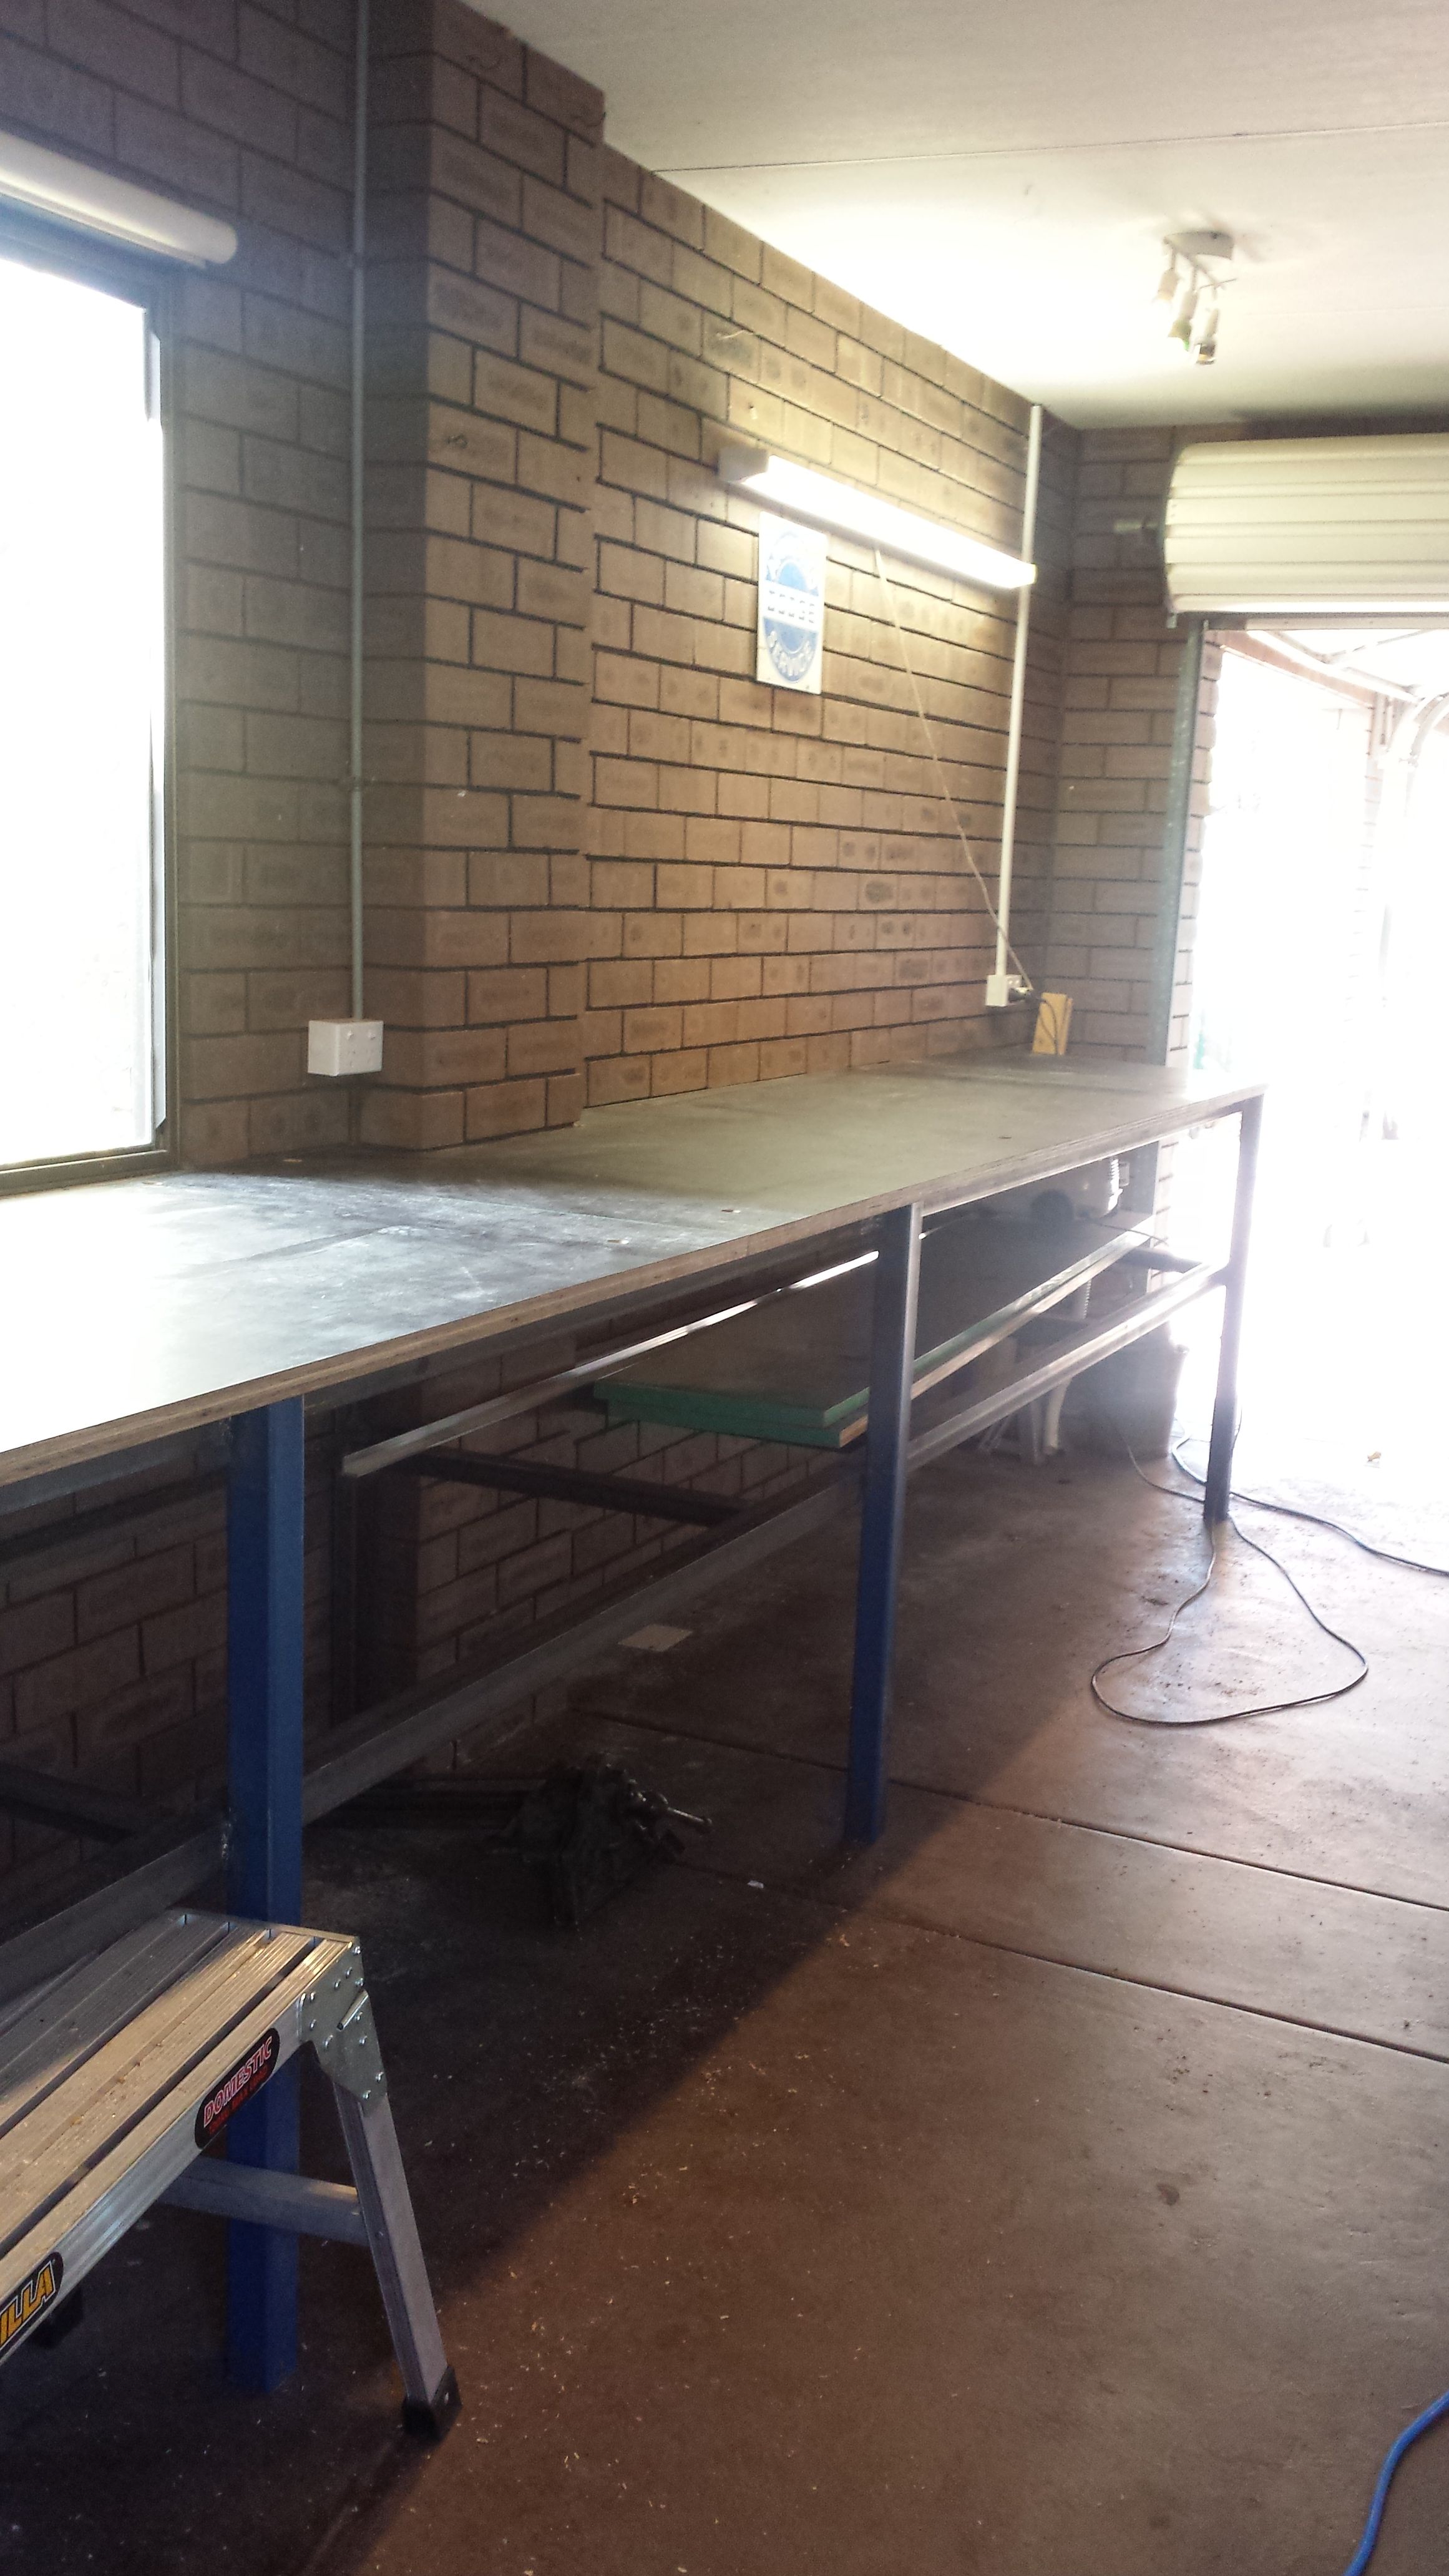 New work benches | Bunnings Workshop Community